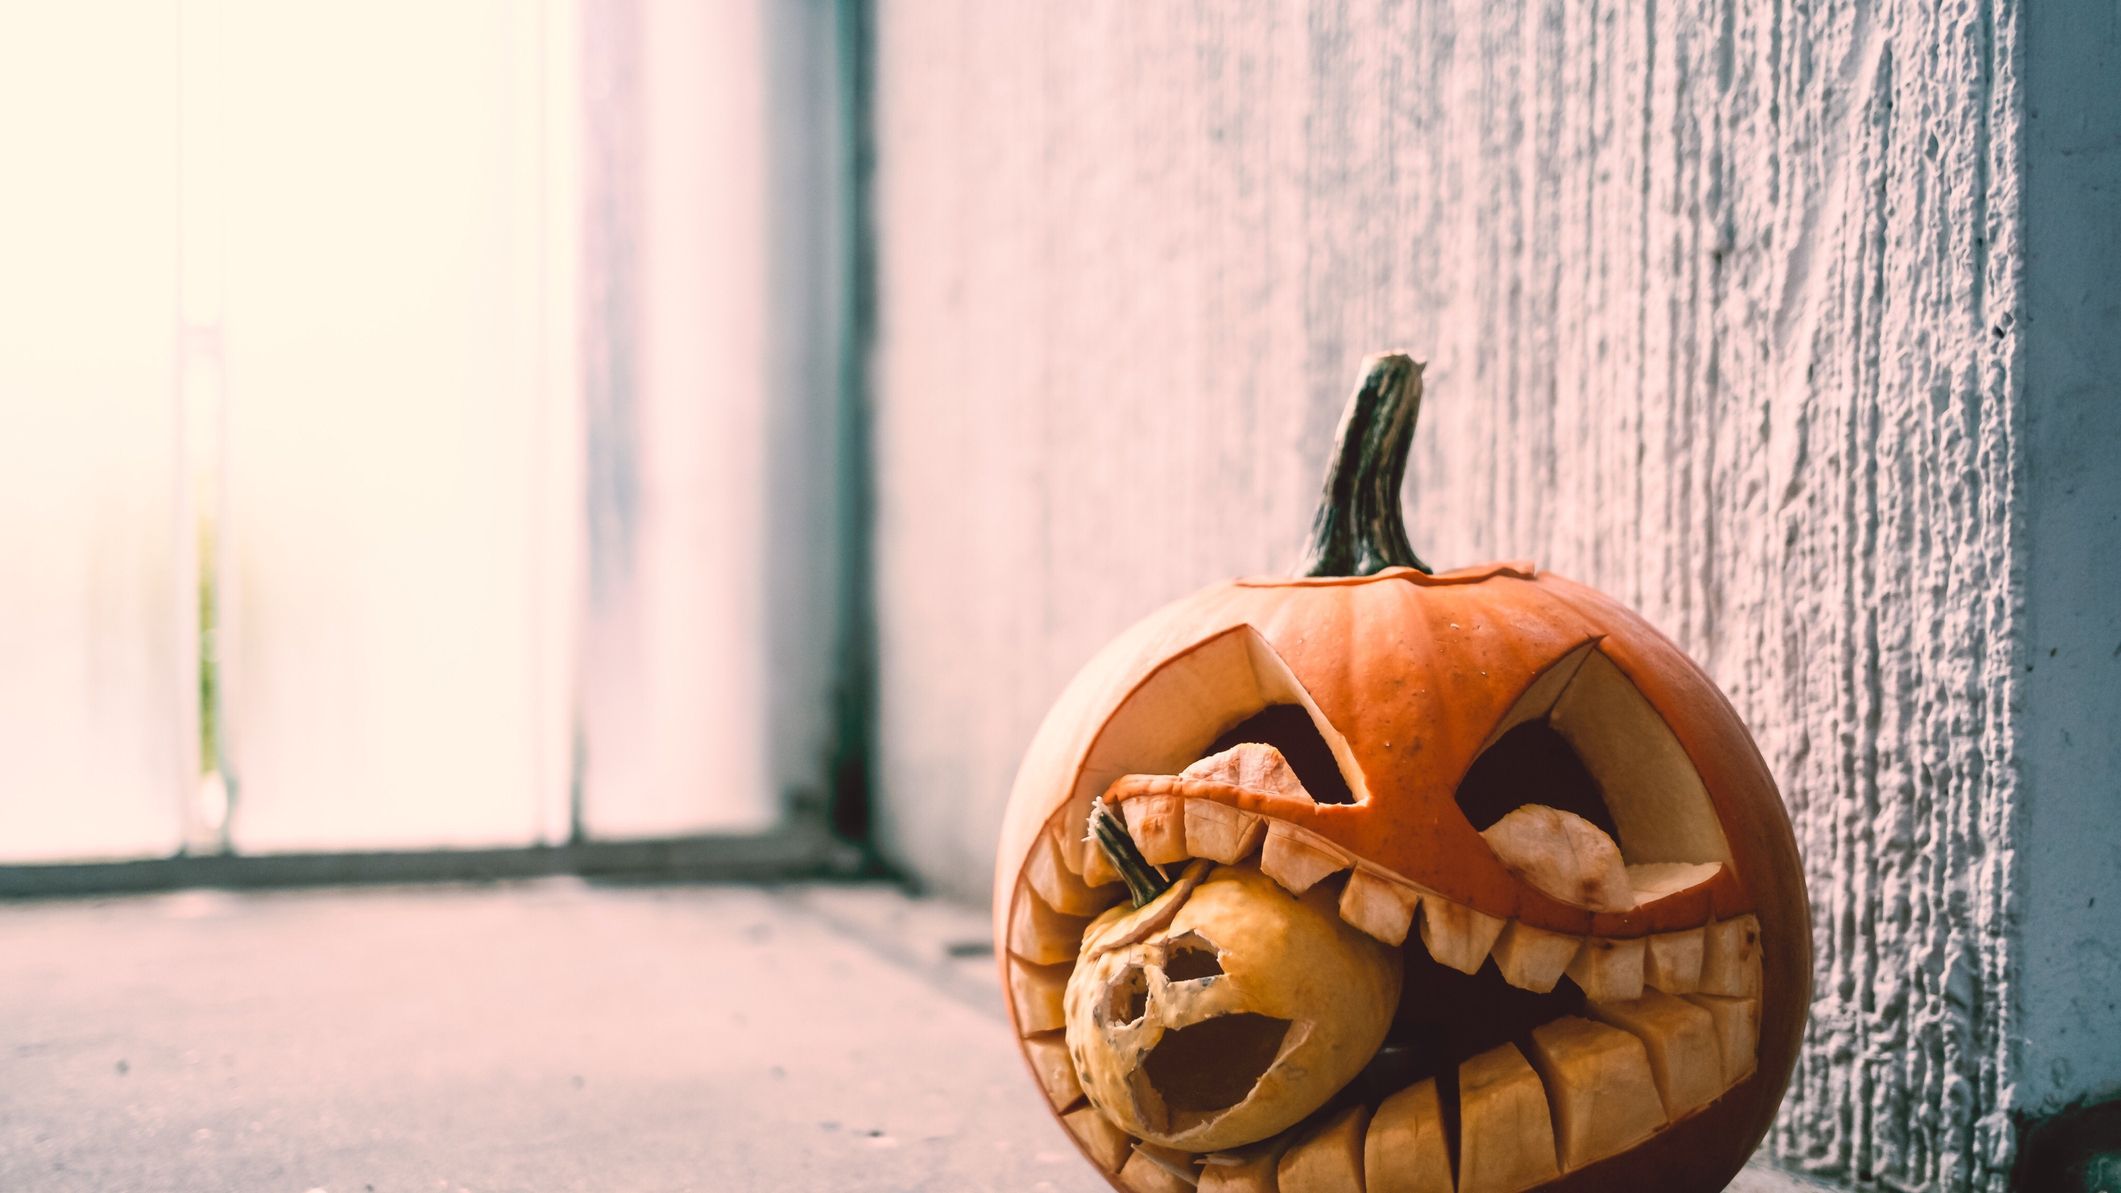 60 Pumpkin Carvings Ideas To Use This Halloween